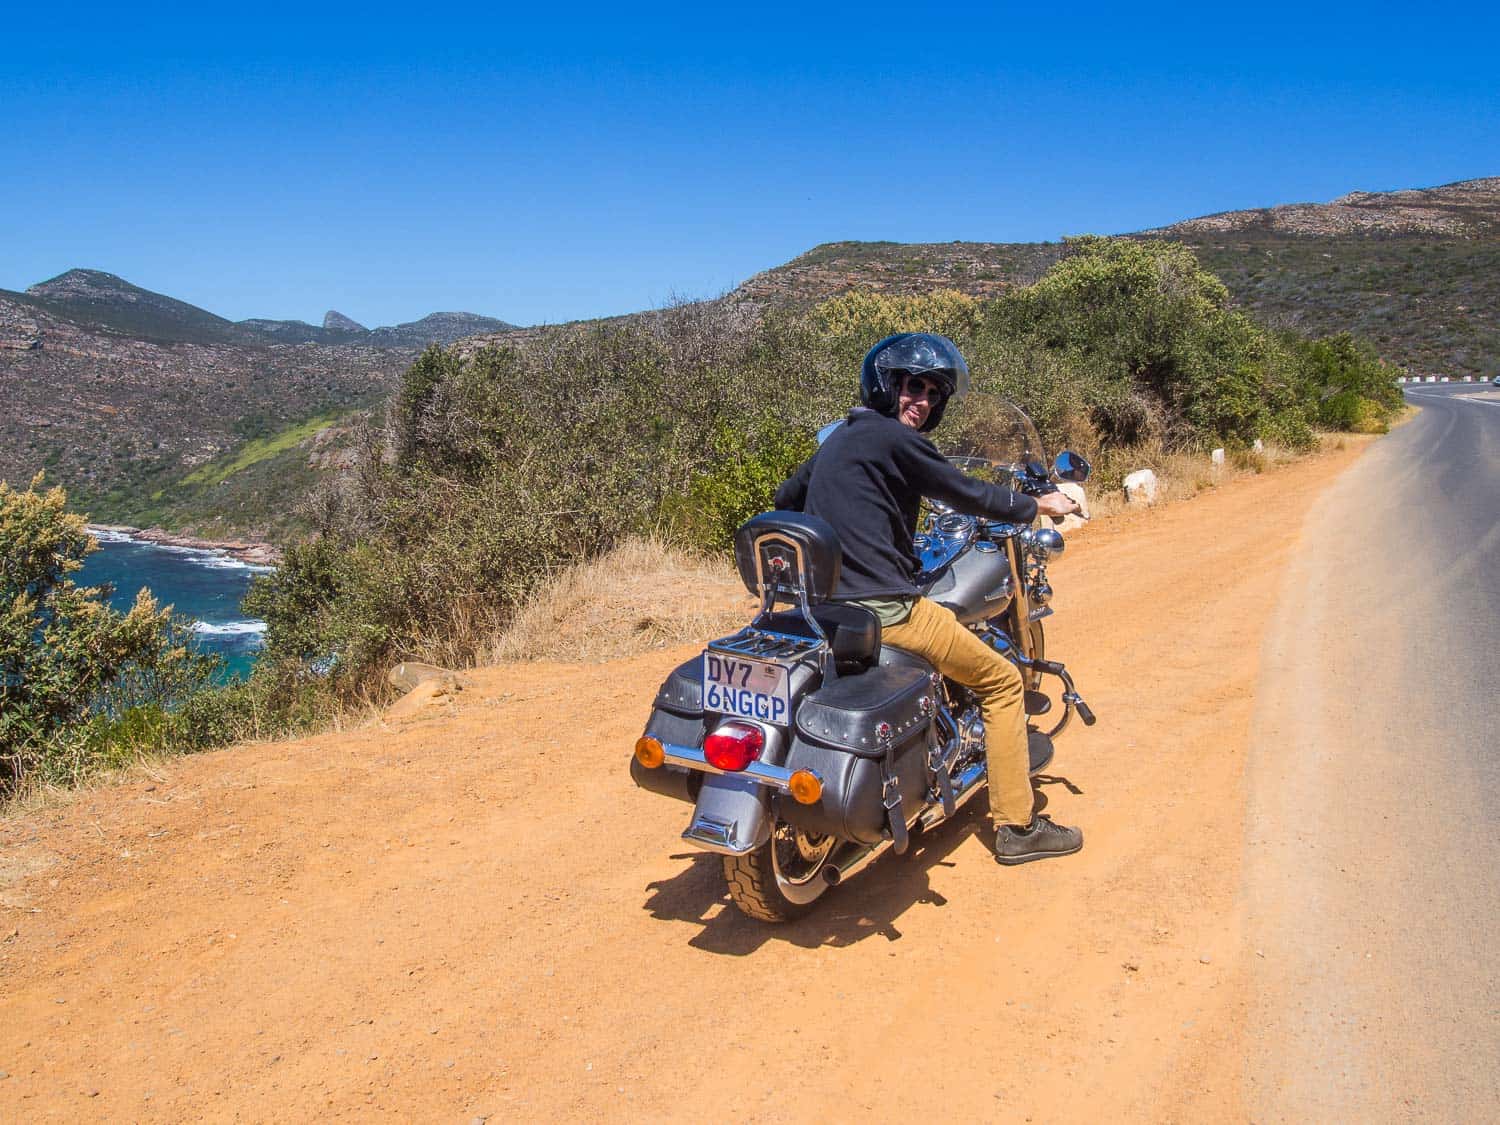 Riding a Harley Davidson to Cape Point on the Cape Peninsula